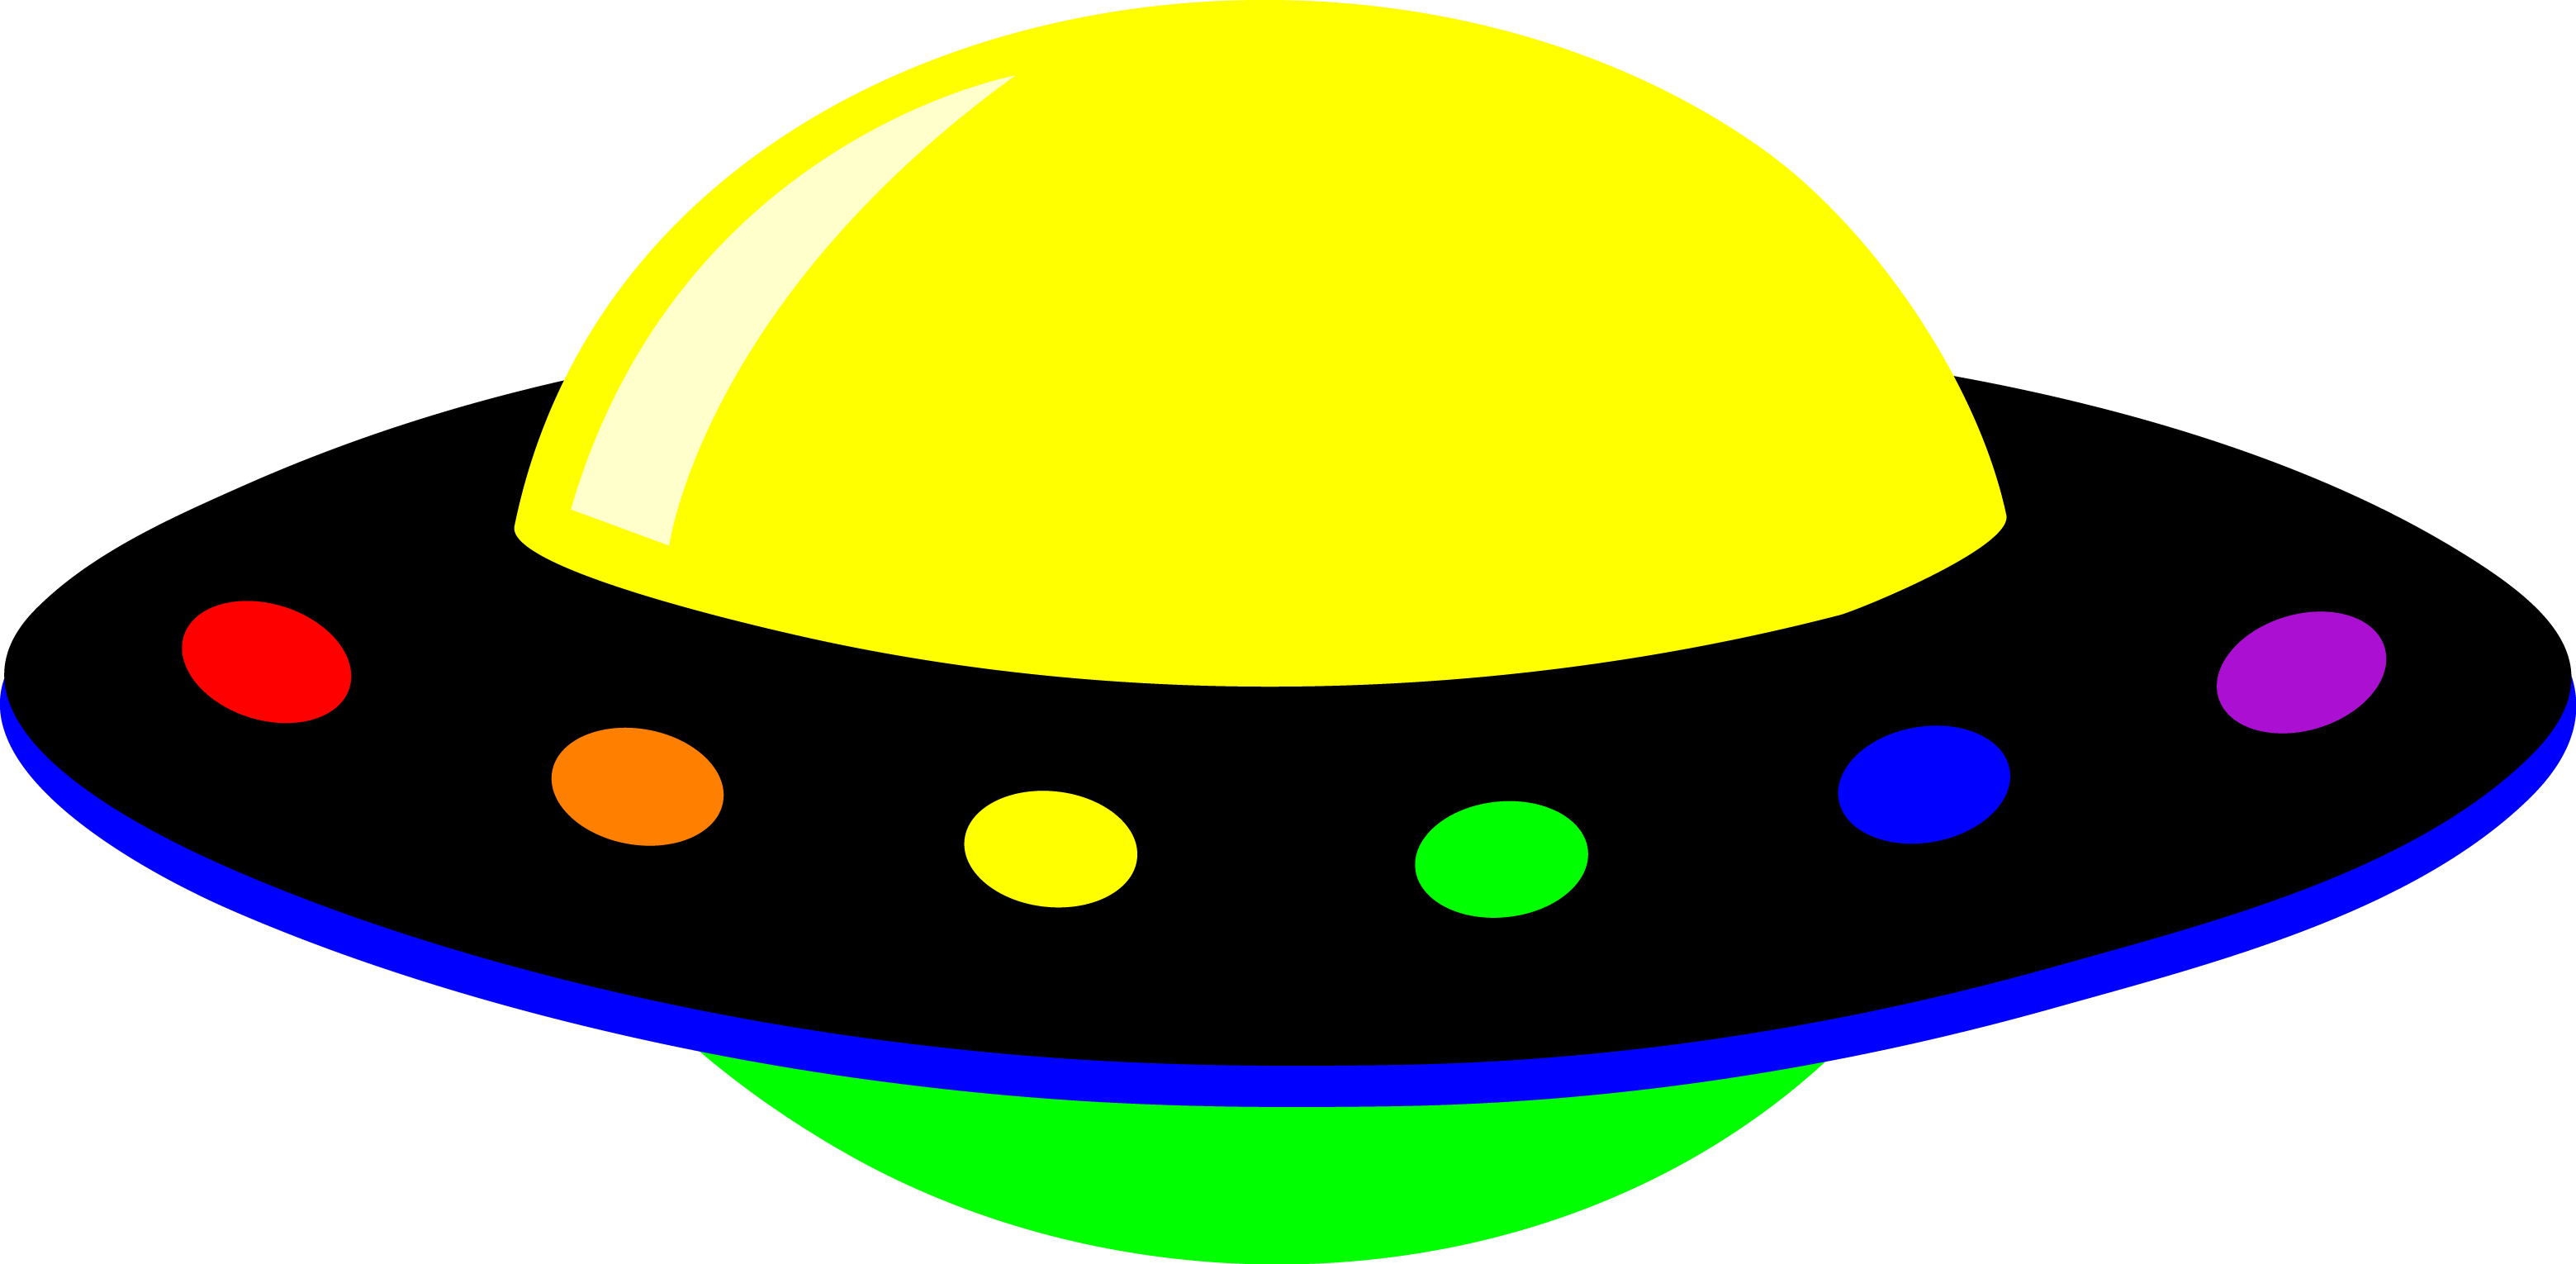 Ufo clipart clear background. Http www cliparthut com